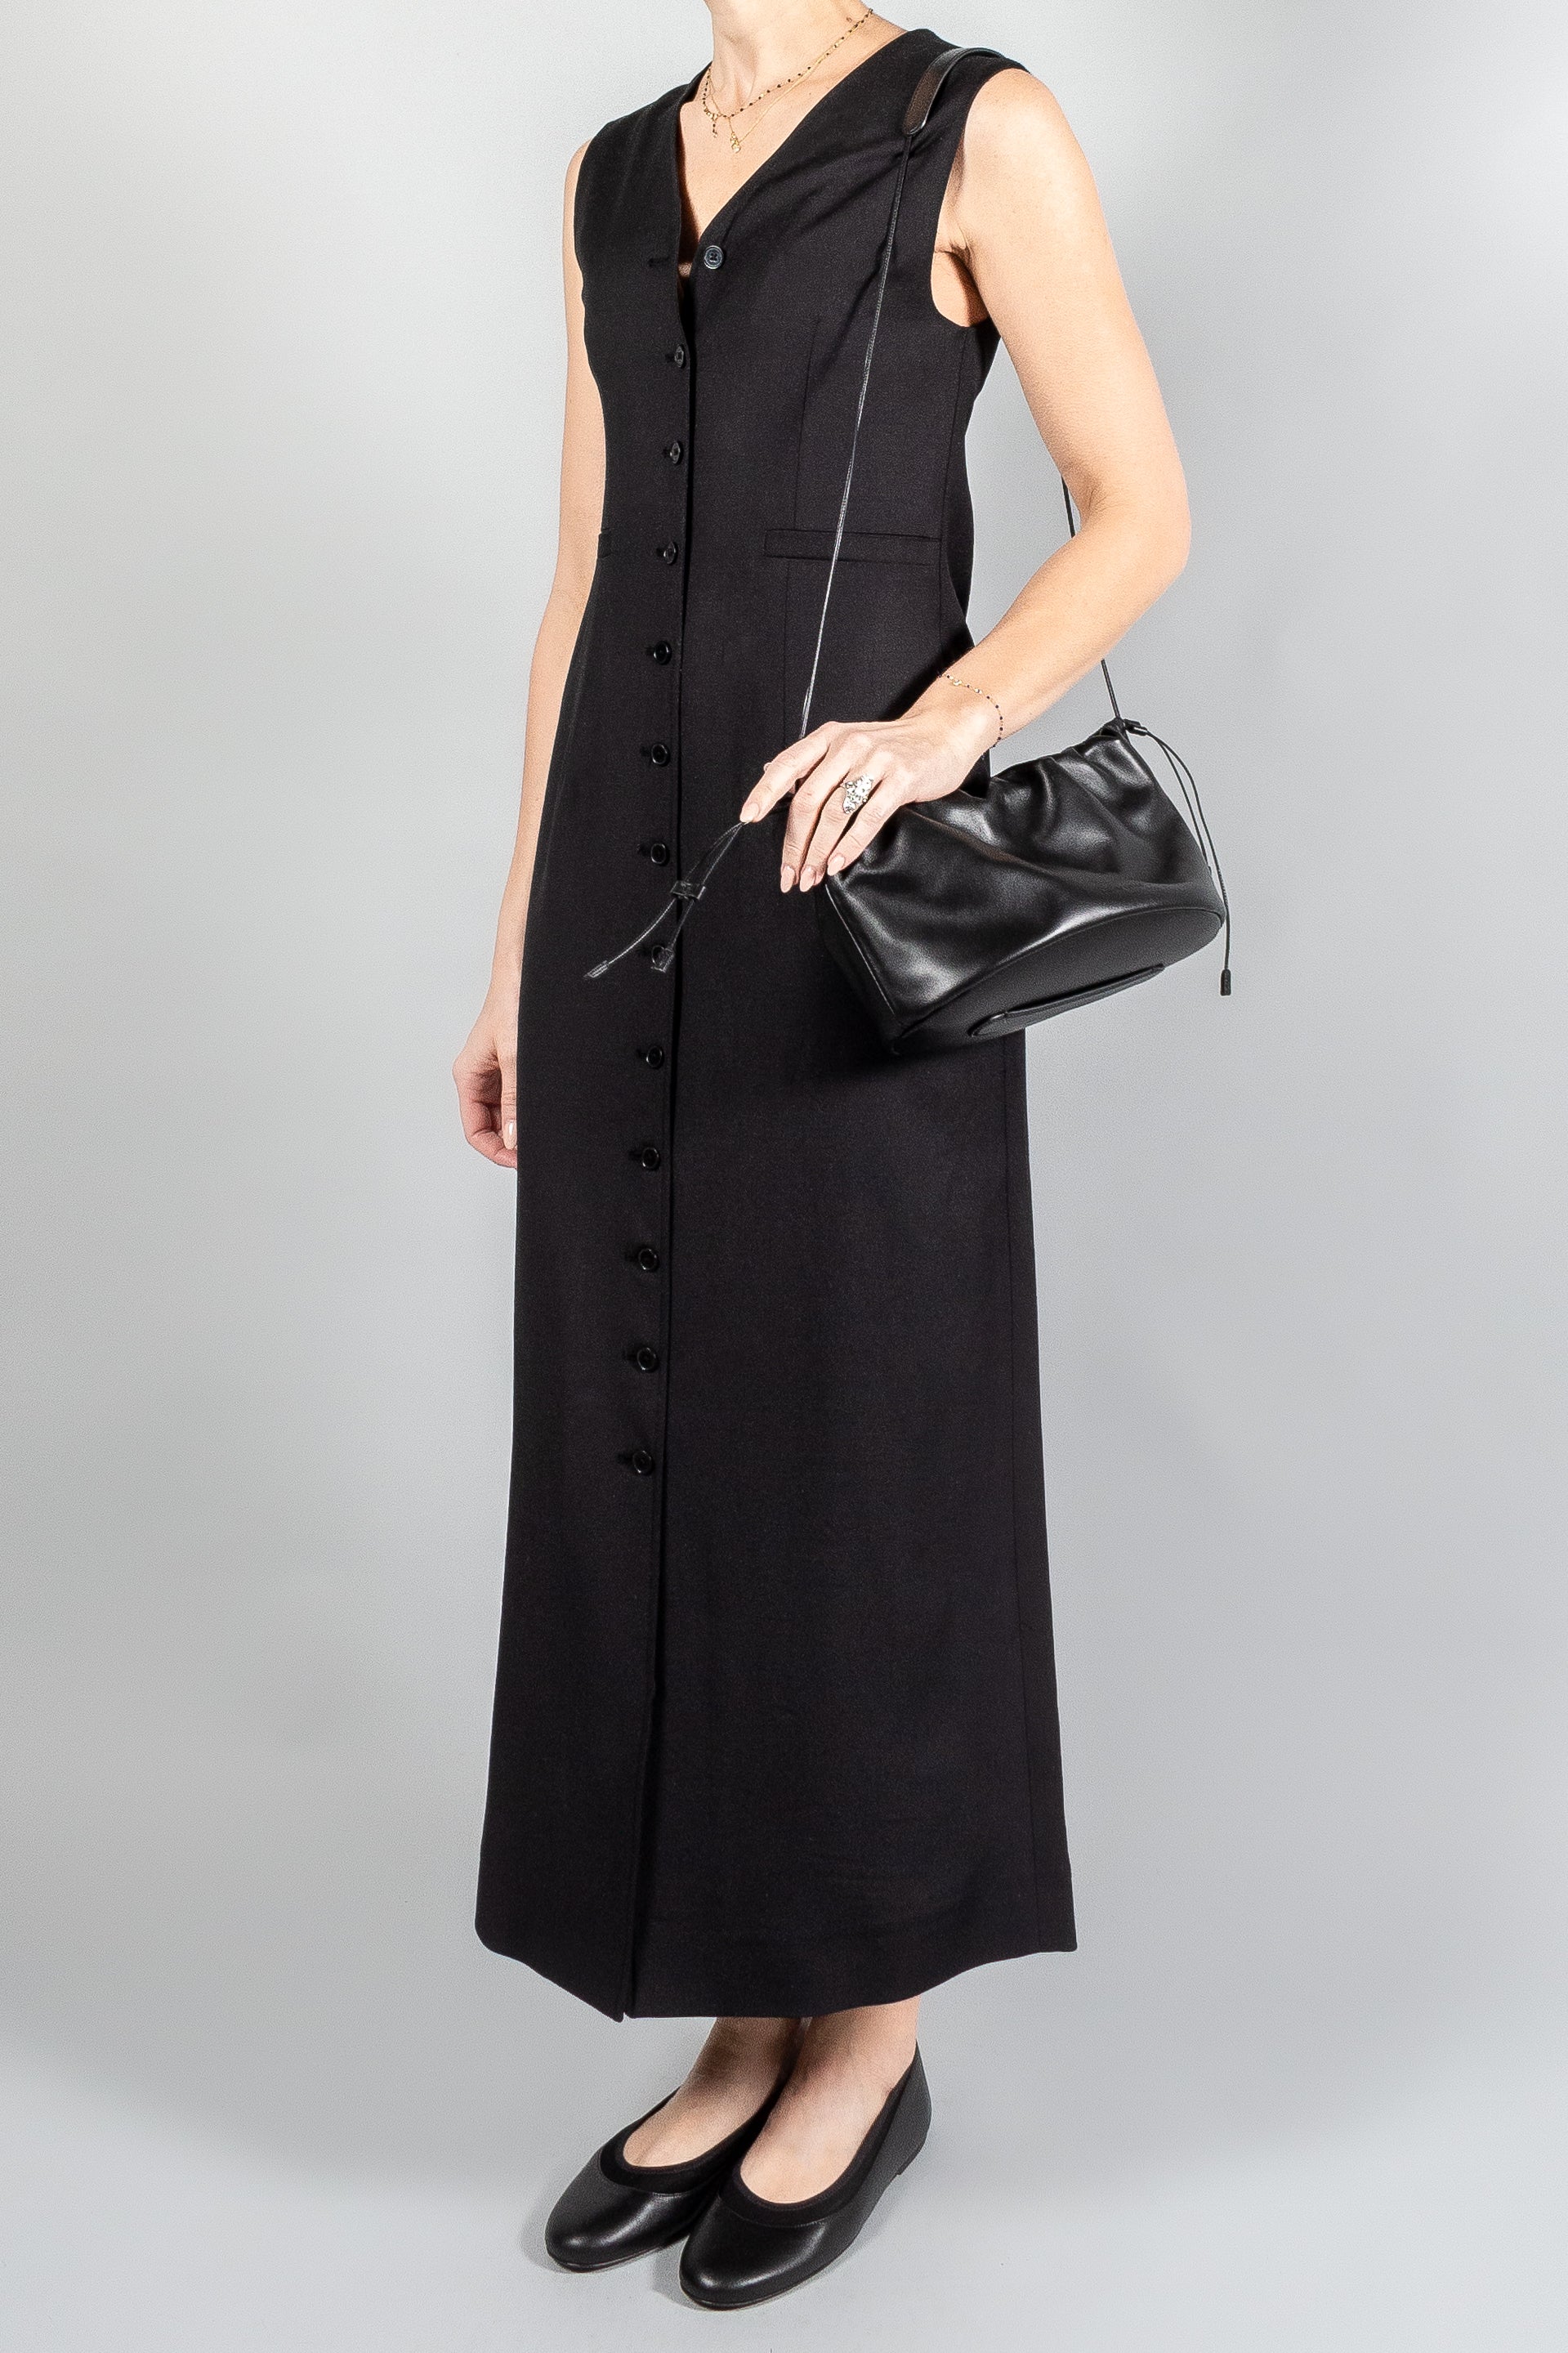 Loulou Studio Idika Long Buttoned Dress-Dresses and Jumsuits-Misch-Boutique-Vancouver-Canada-misch.ca